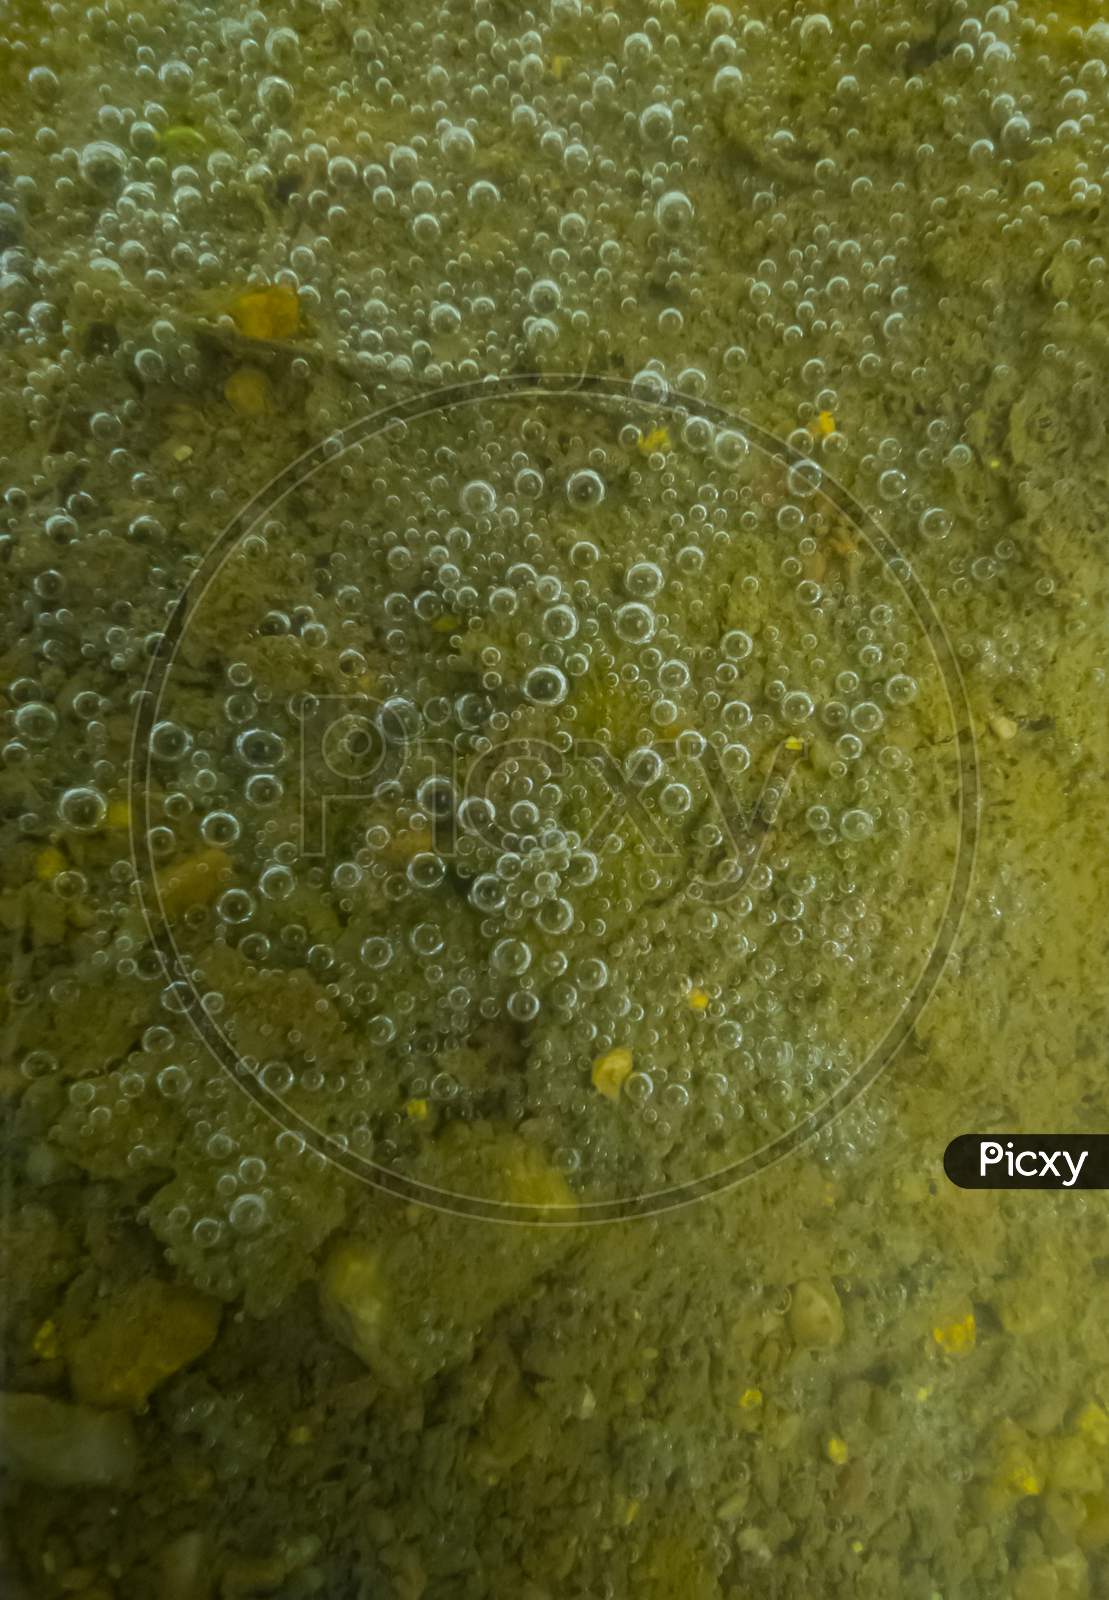 Air bubbles in lake water. Air bubbles in dirty pond water. Air bubbles if algae in water.